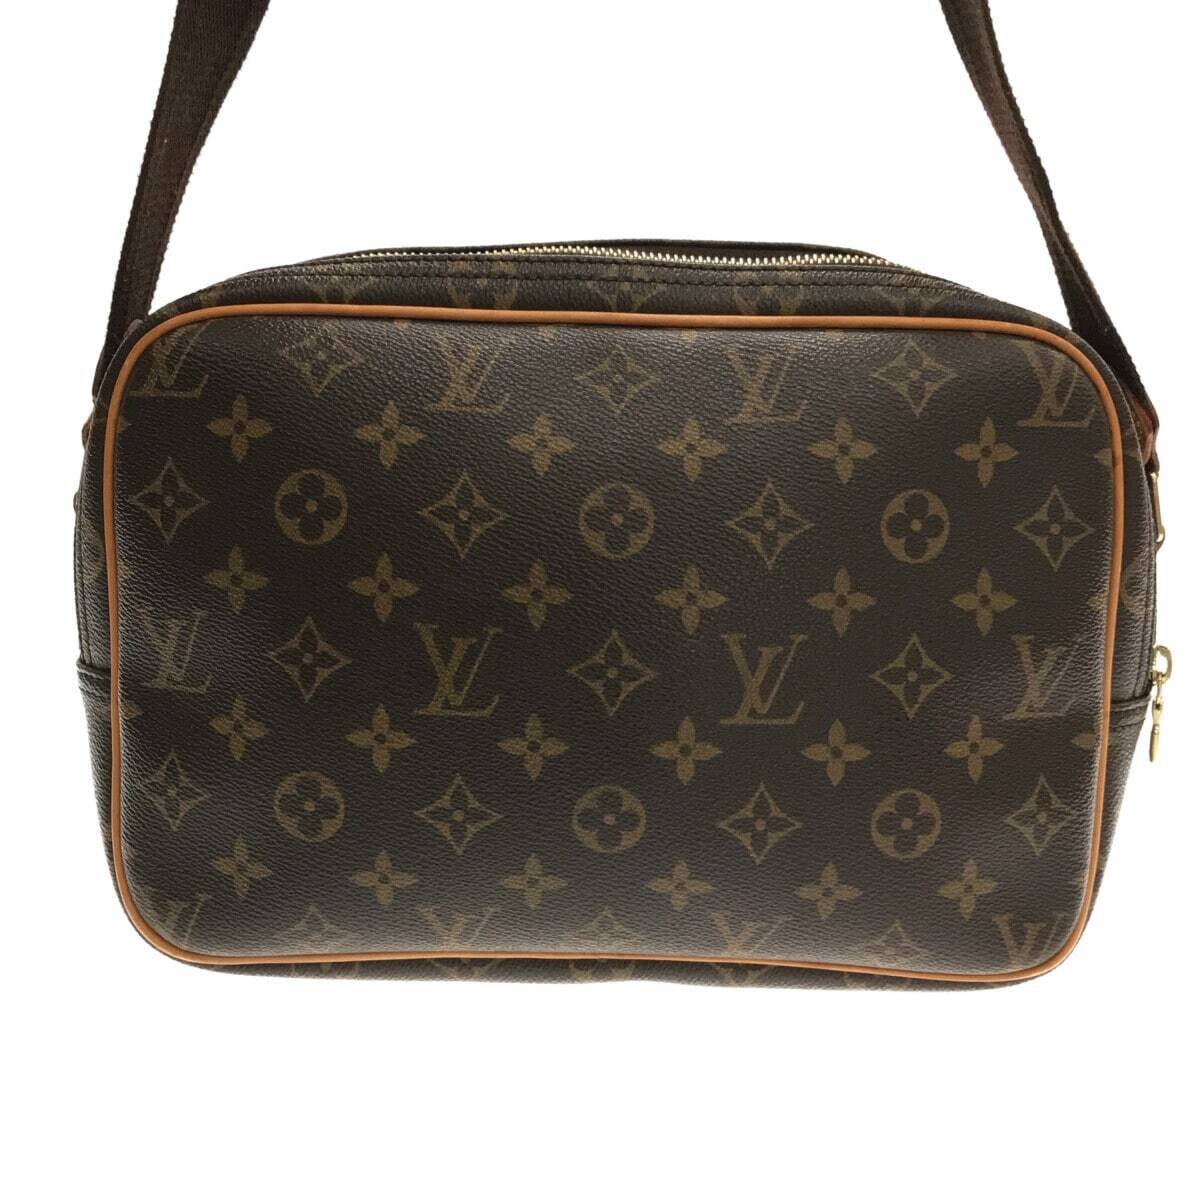 LOUIS VUITTON Speedy 25 Date code: SP0071 (Made in France, July